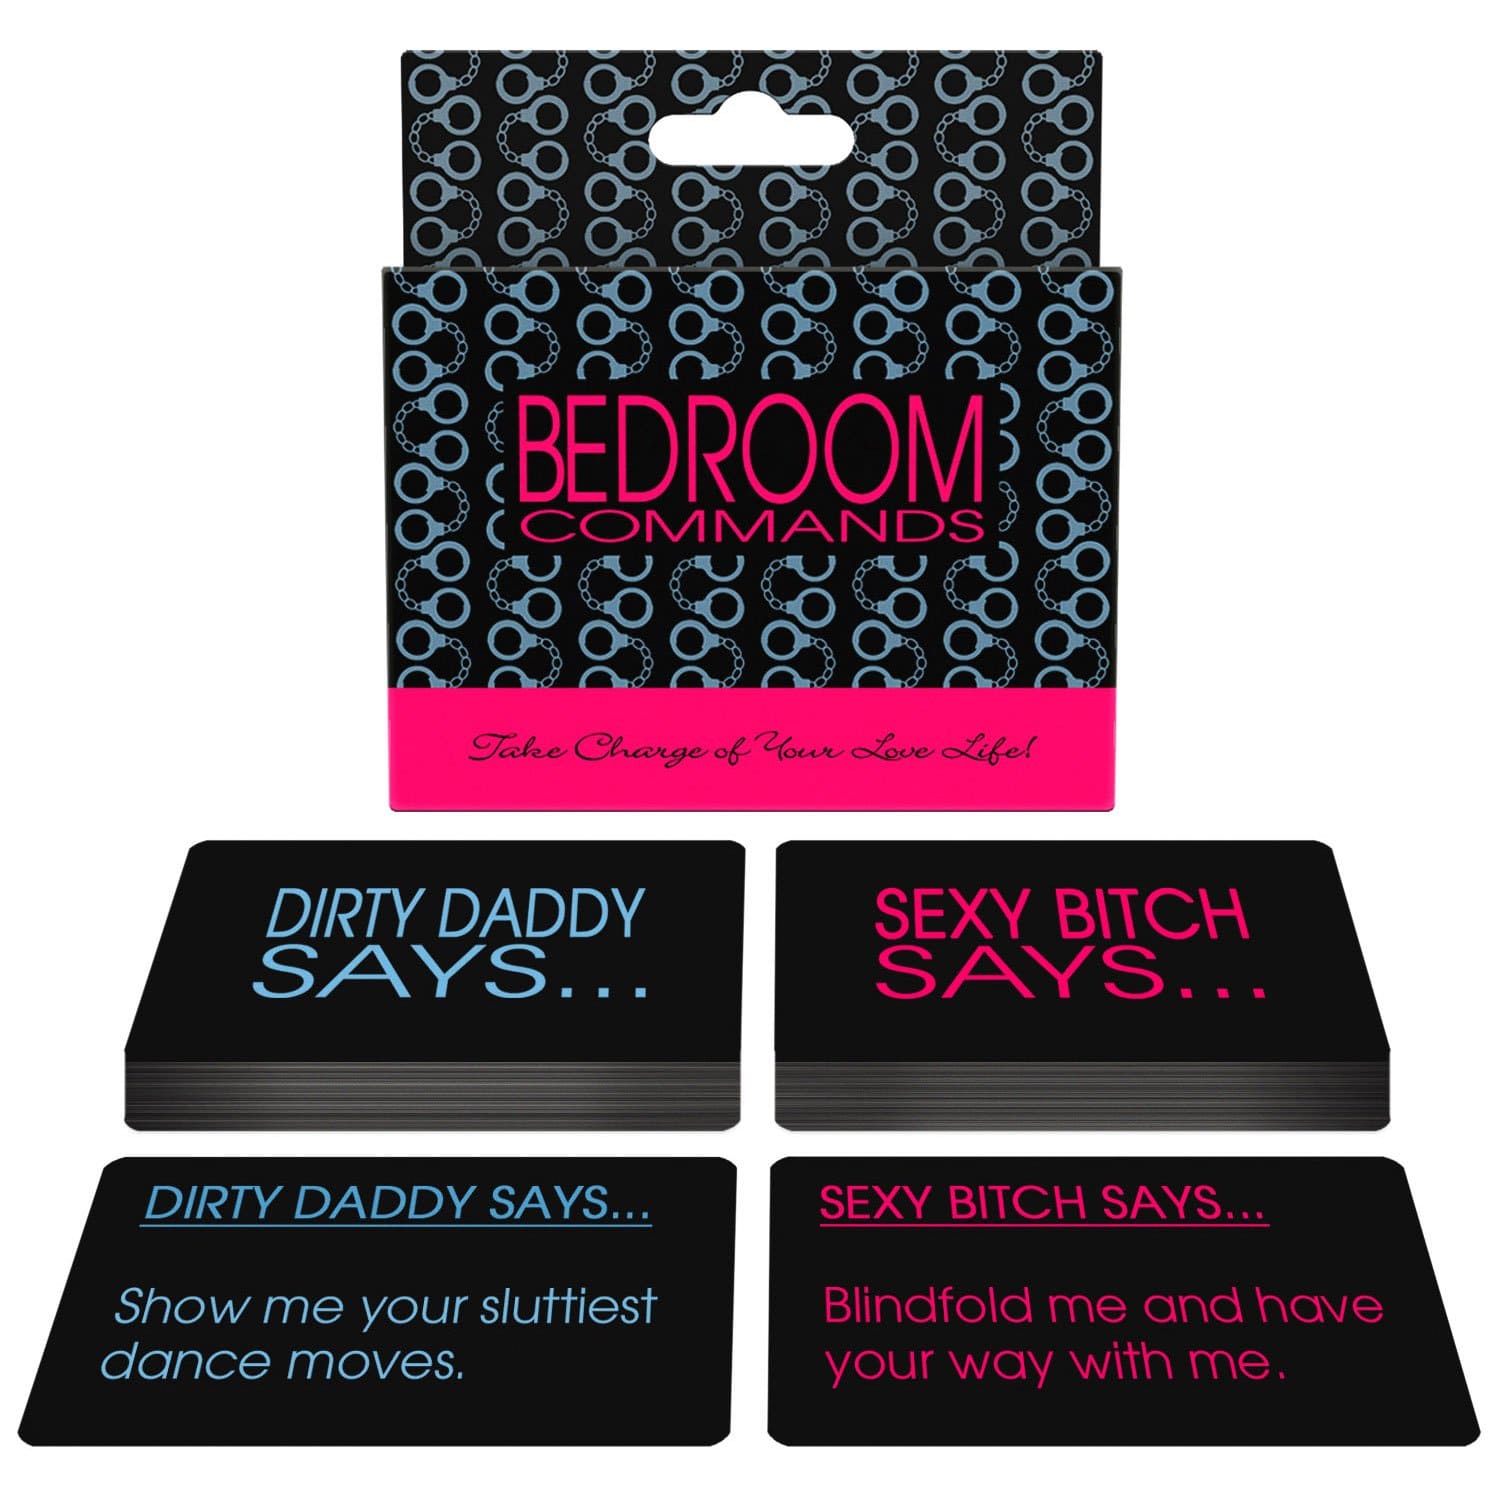 Romance Games - Bedroom Commands Card Game - Thorn & Feather Sex Toy Canada